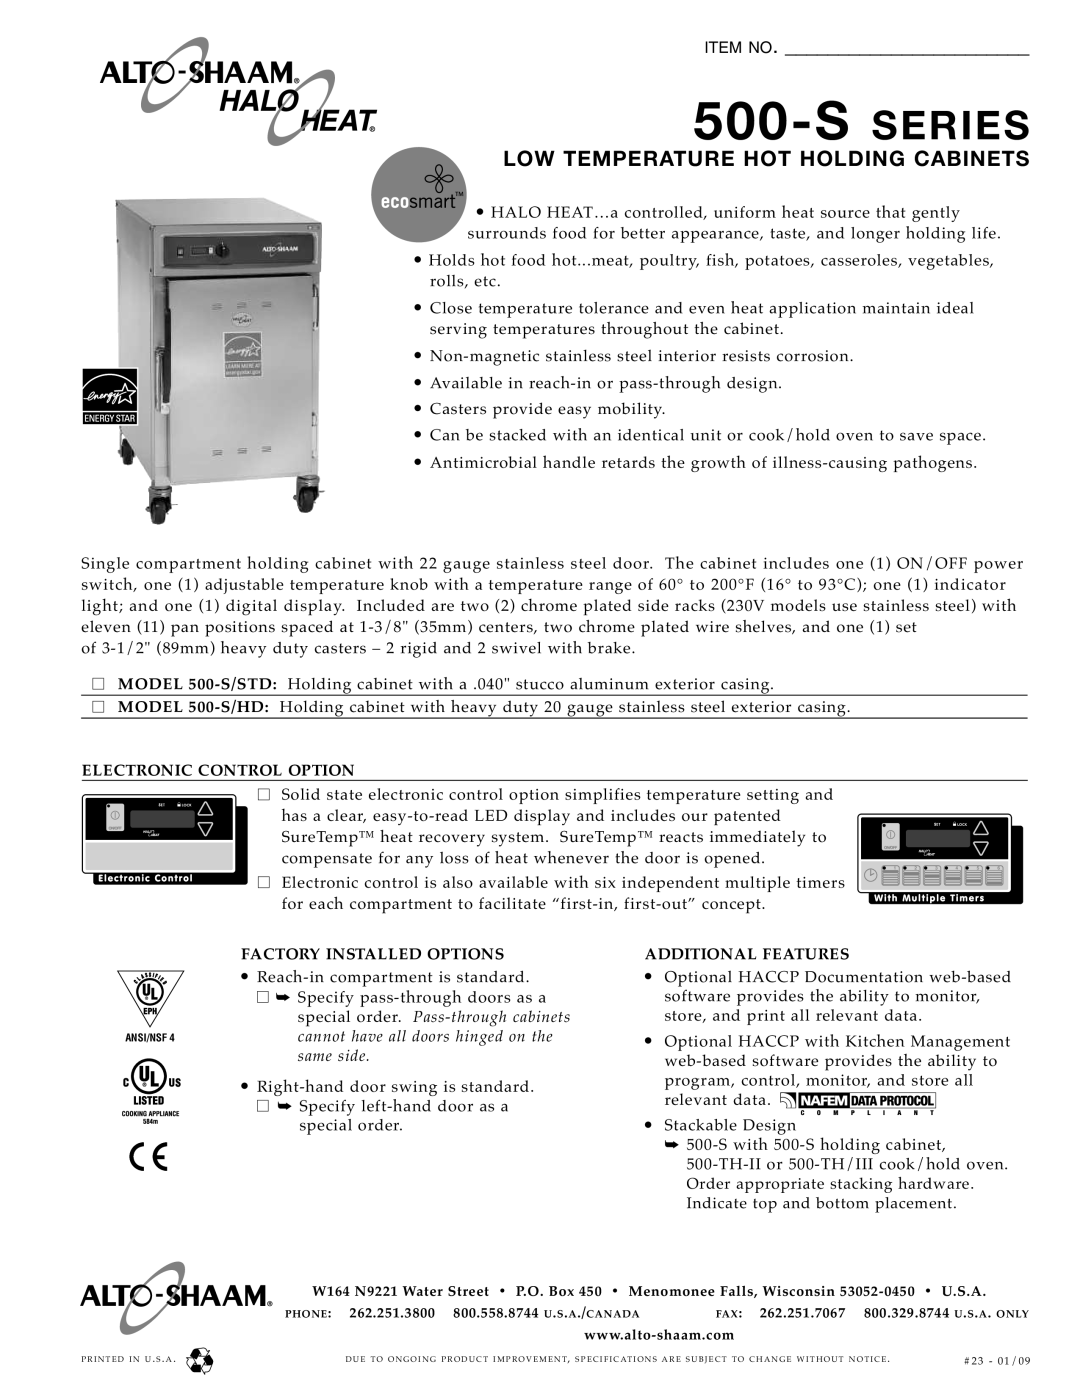 Alto-Shaam 500-S/HD specifications S Series, Low Temperature Hot Holding Cabinets, Item No, Electronic Control Option 